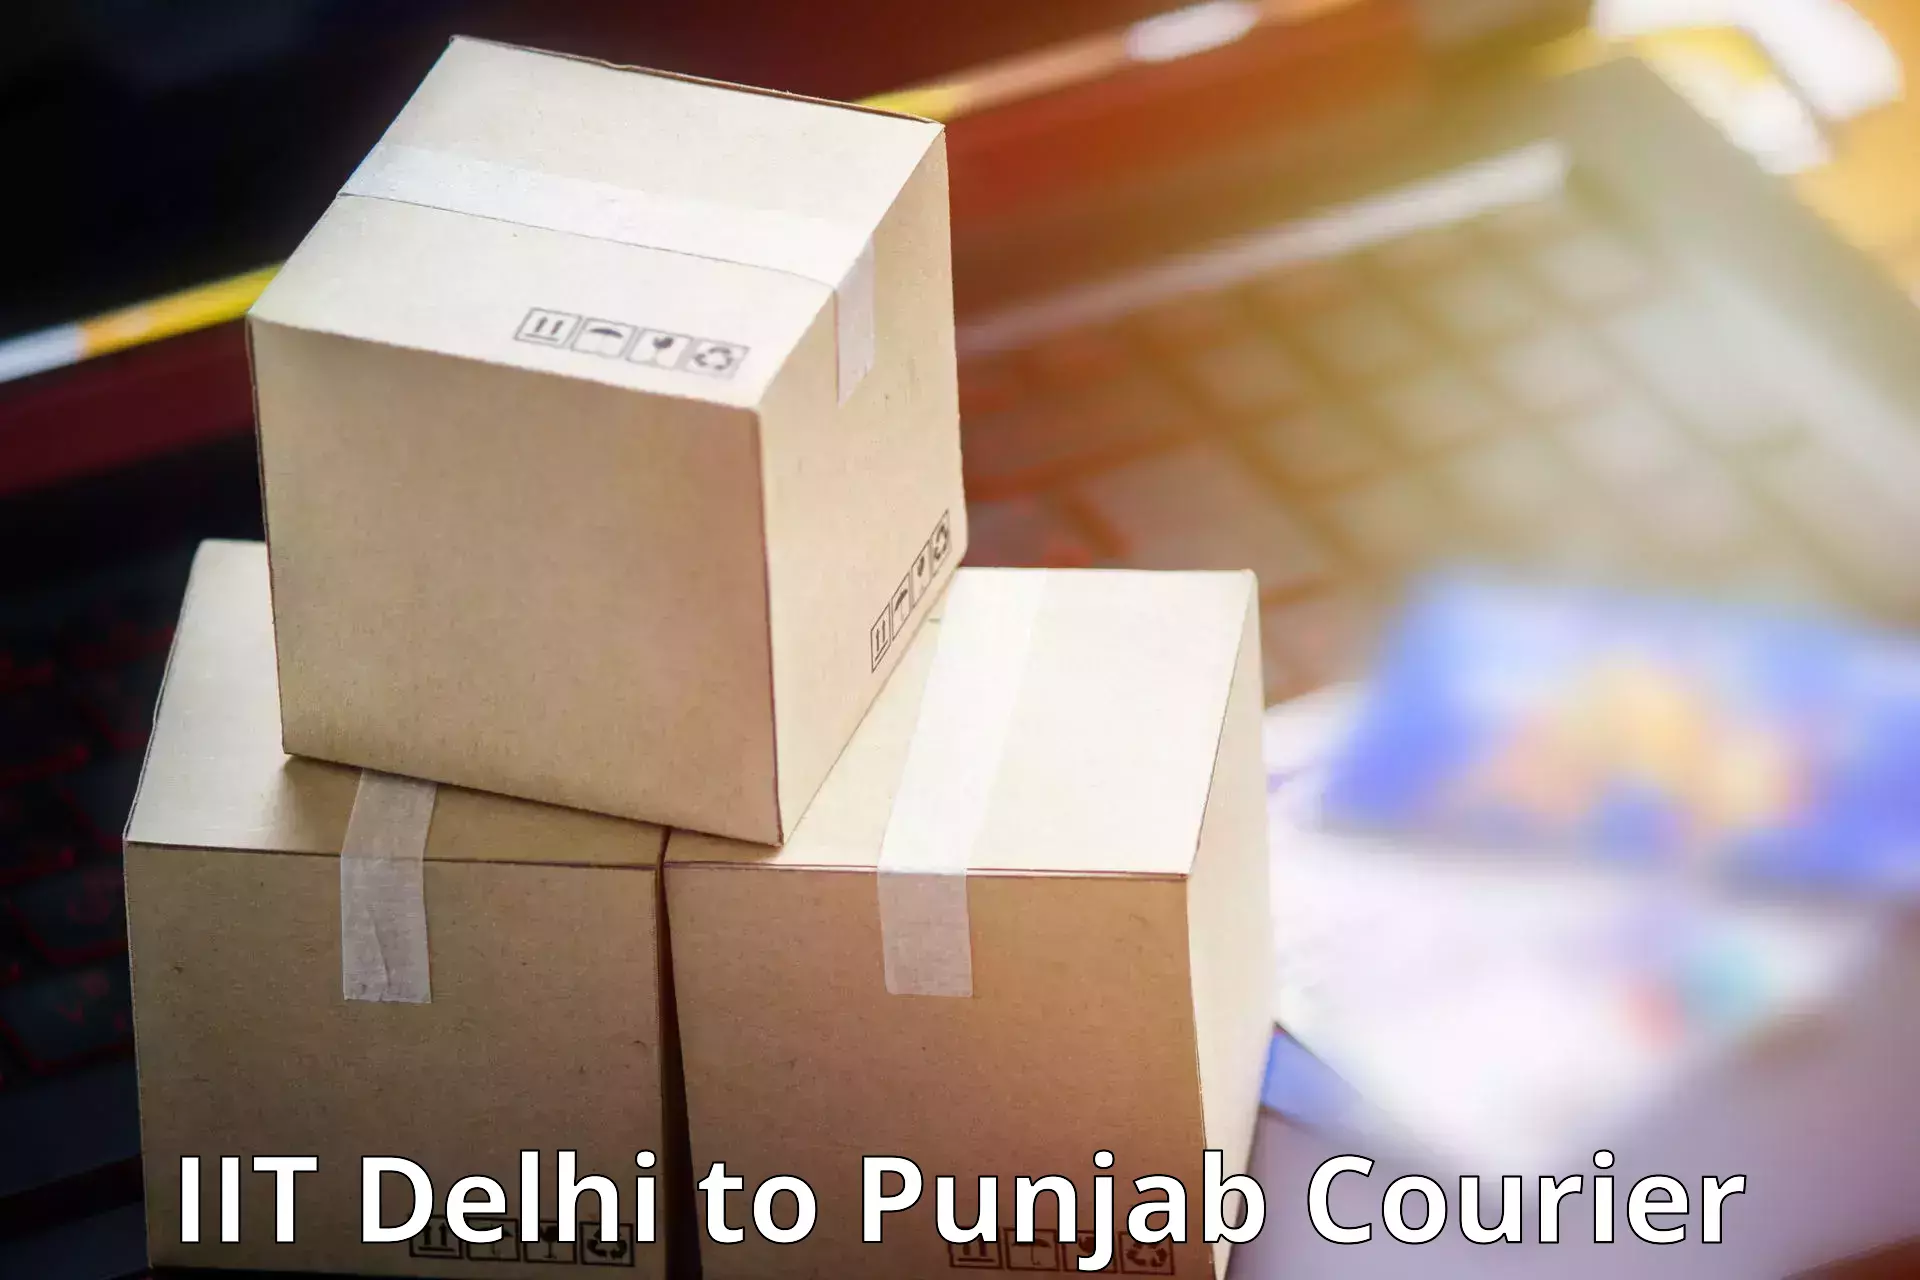 On-call courier service IIT Delhi to Nangal